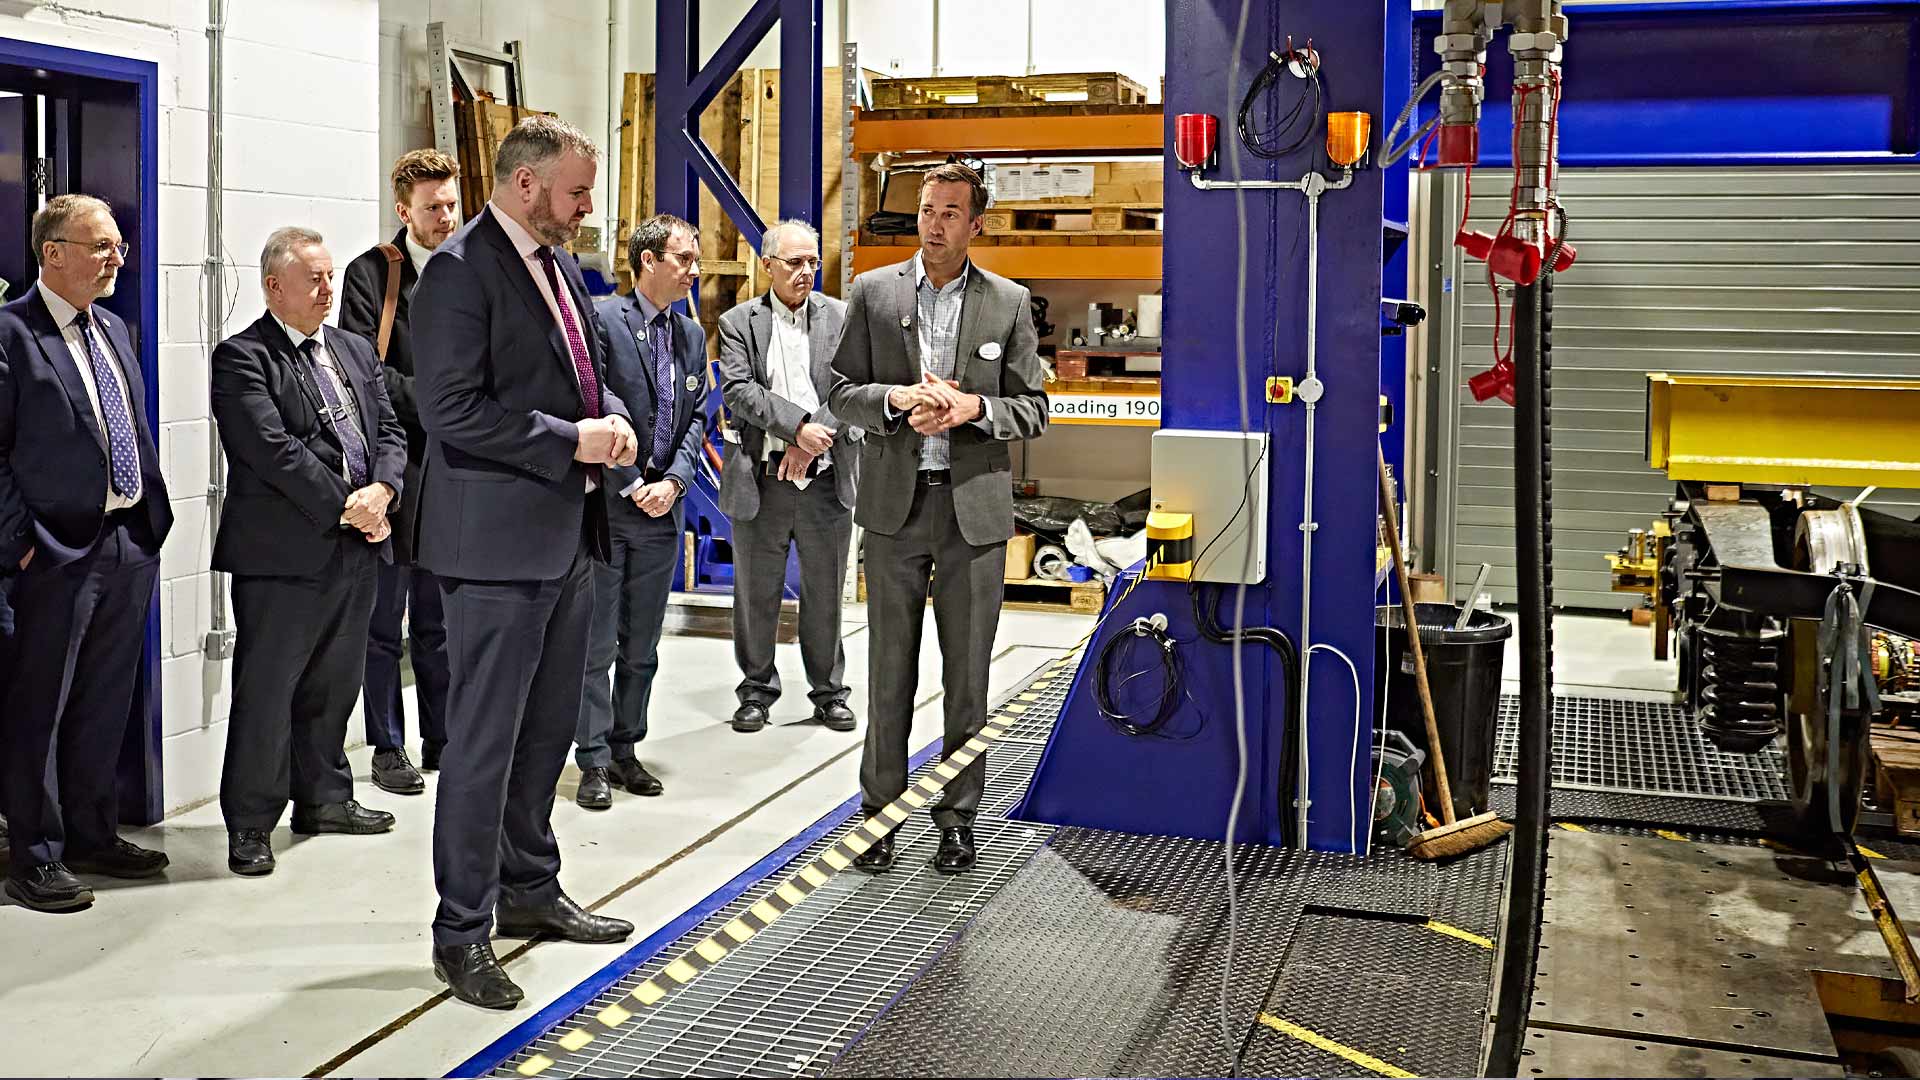 Andrew Stephenson MP on his tour of the new Centre of Excellence in Rolling Stock at the University of Huddersfield